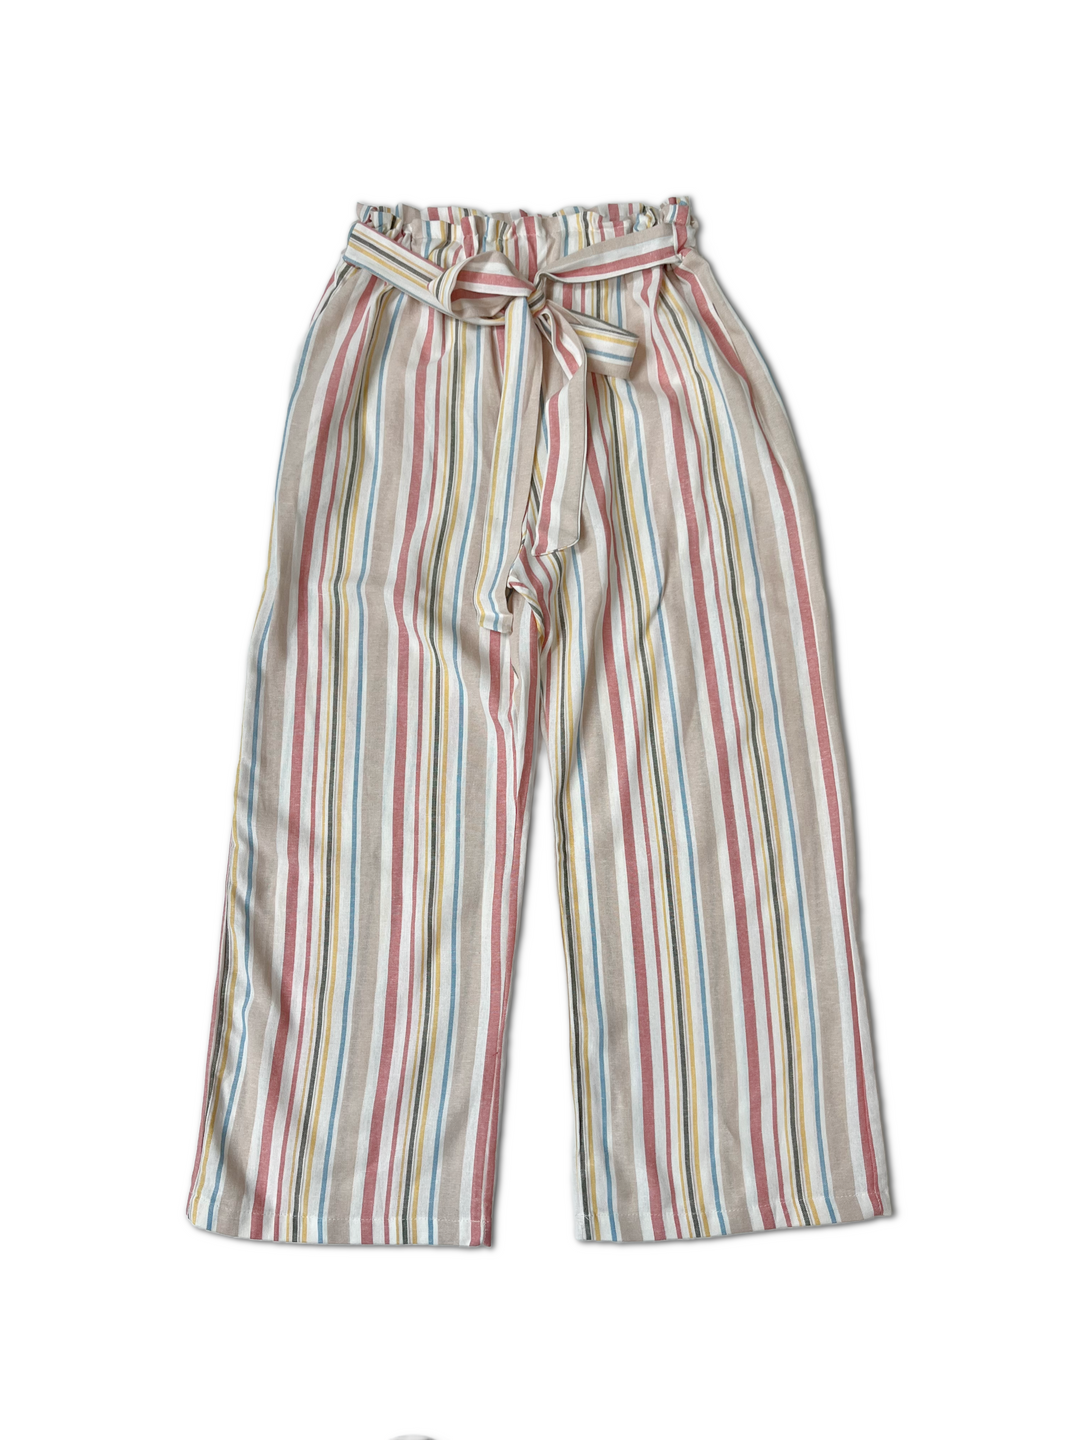 Chill In Style - Striped Culotte Pants